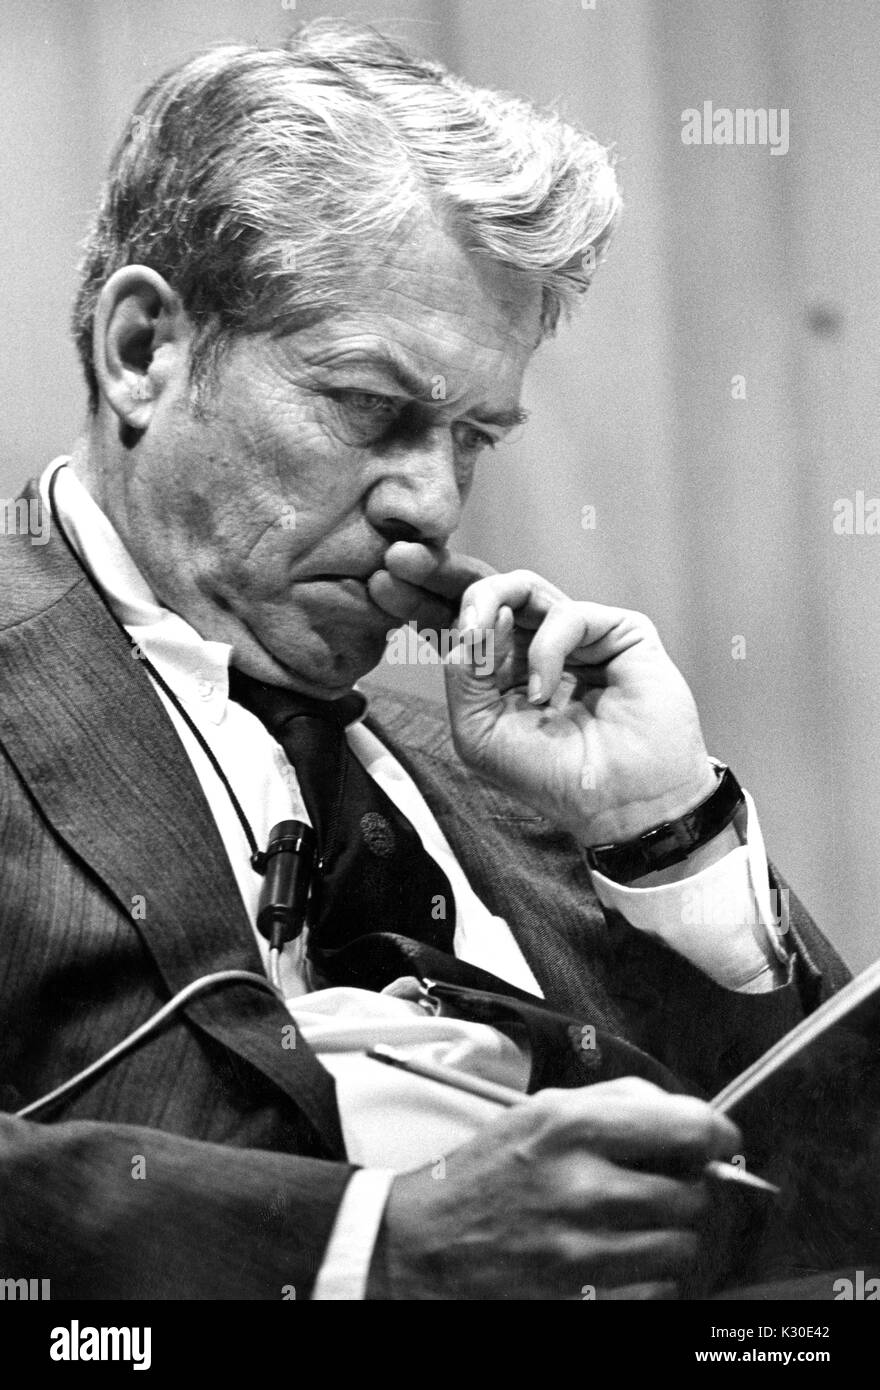 A half body portrait of editor in chief of Time Inc Hedley Donovan concentrating on what he is reading at the American University Symposium, Washington DC, February 21, 1976. Stock Photo